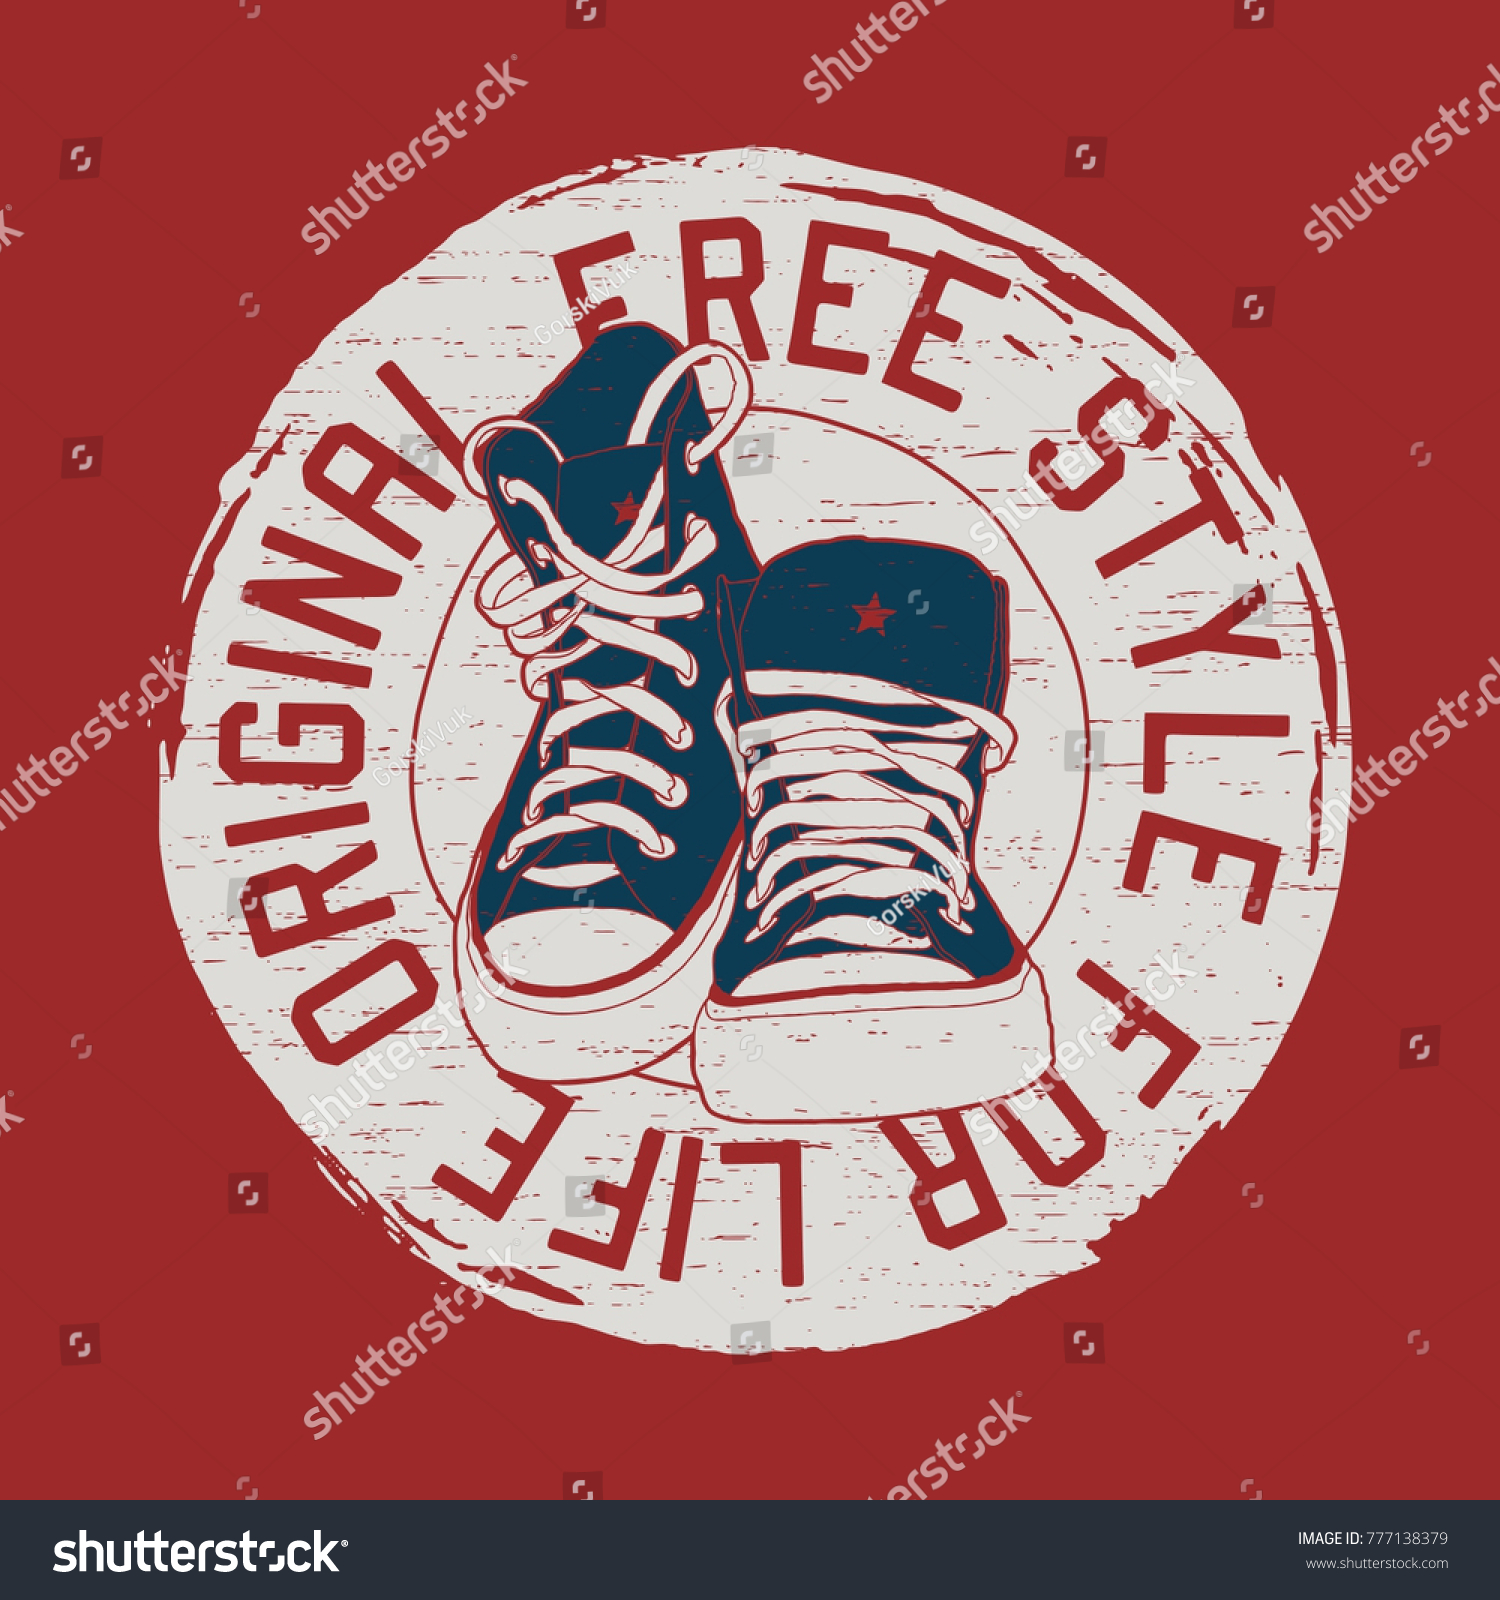 Sneakers Illustration Tshirt Vintage Style Pair Stock Vector (Royalty ...